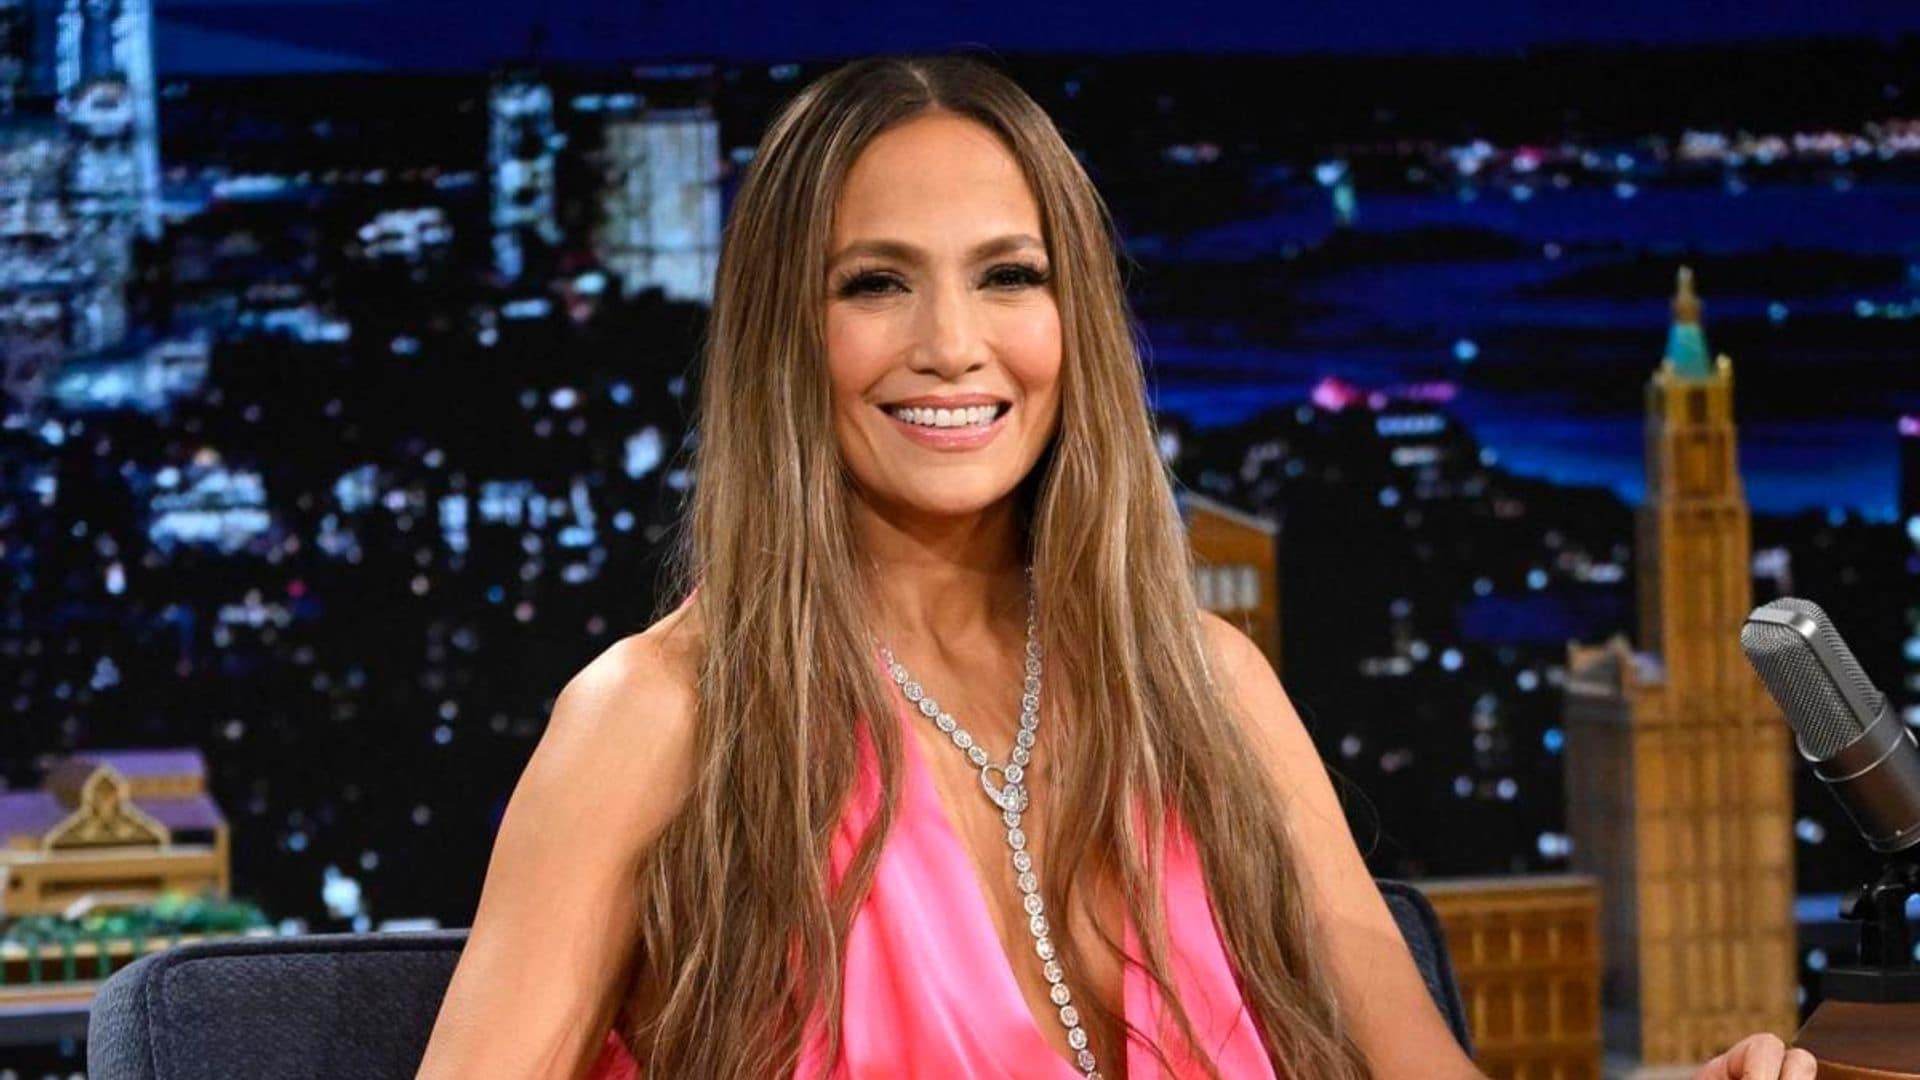 Jennifer Lopez shares a look at her surprisingly simple fitness routine